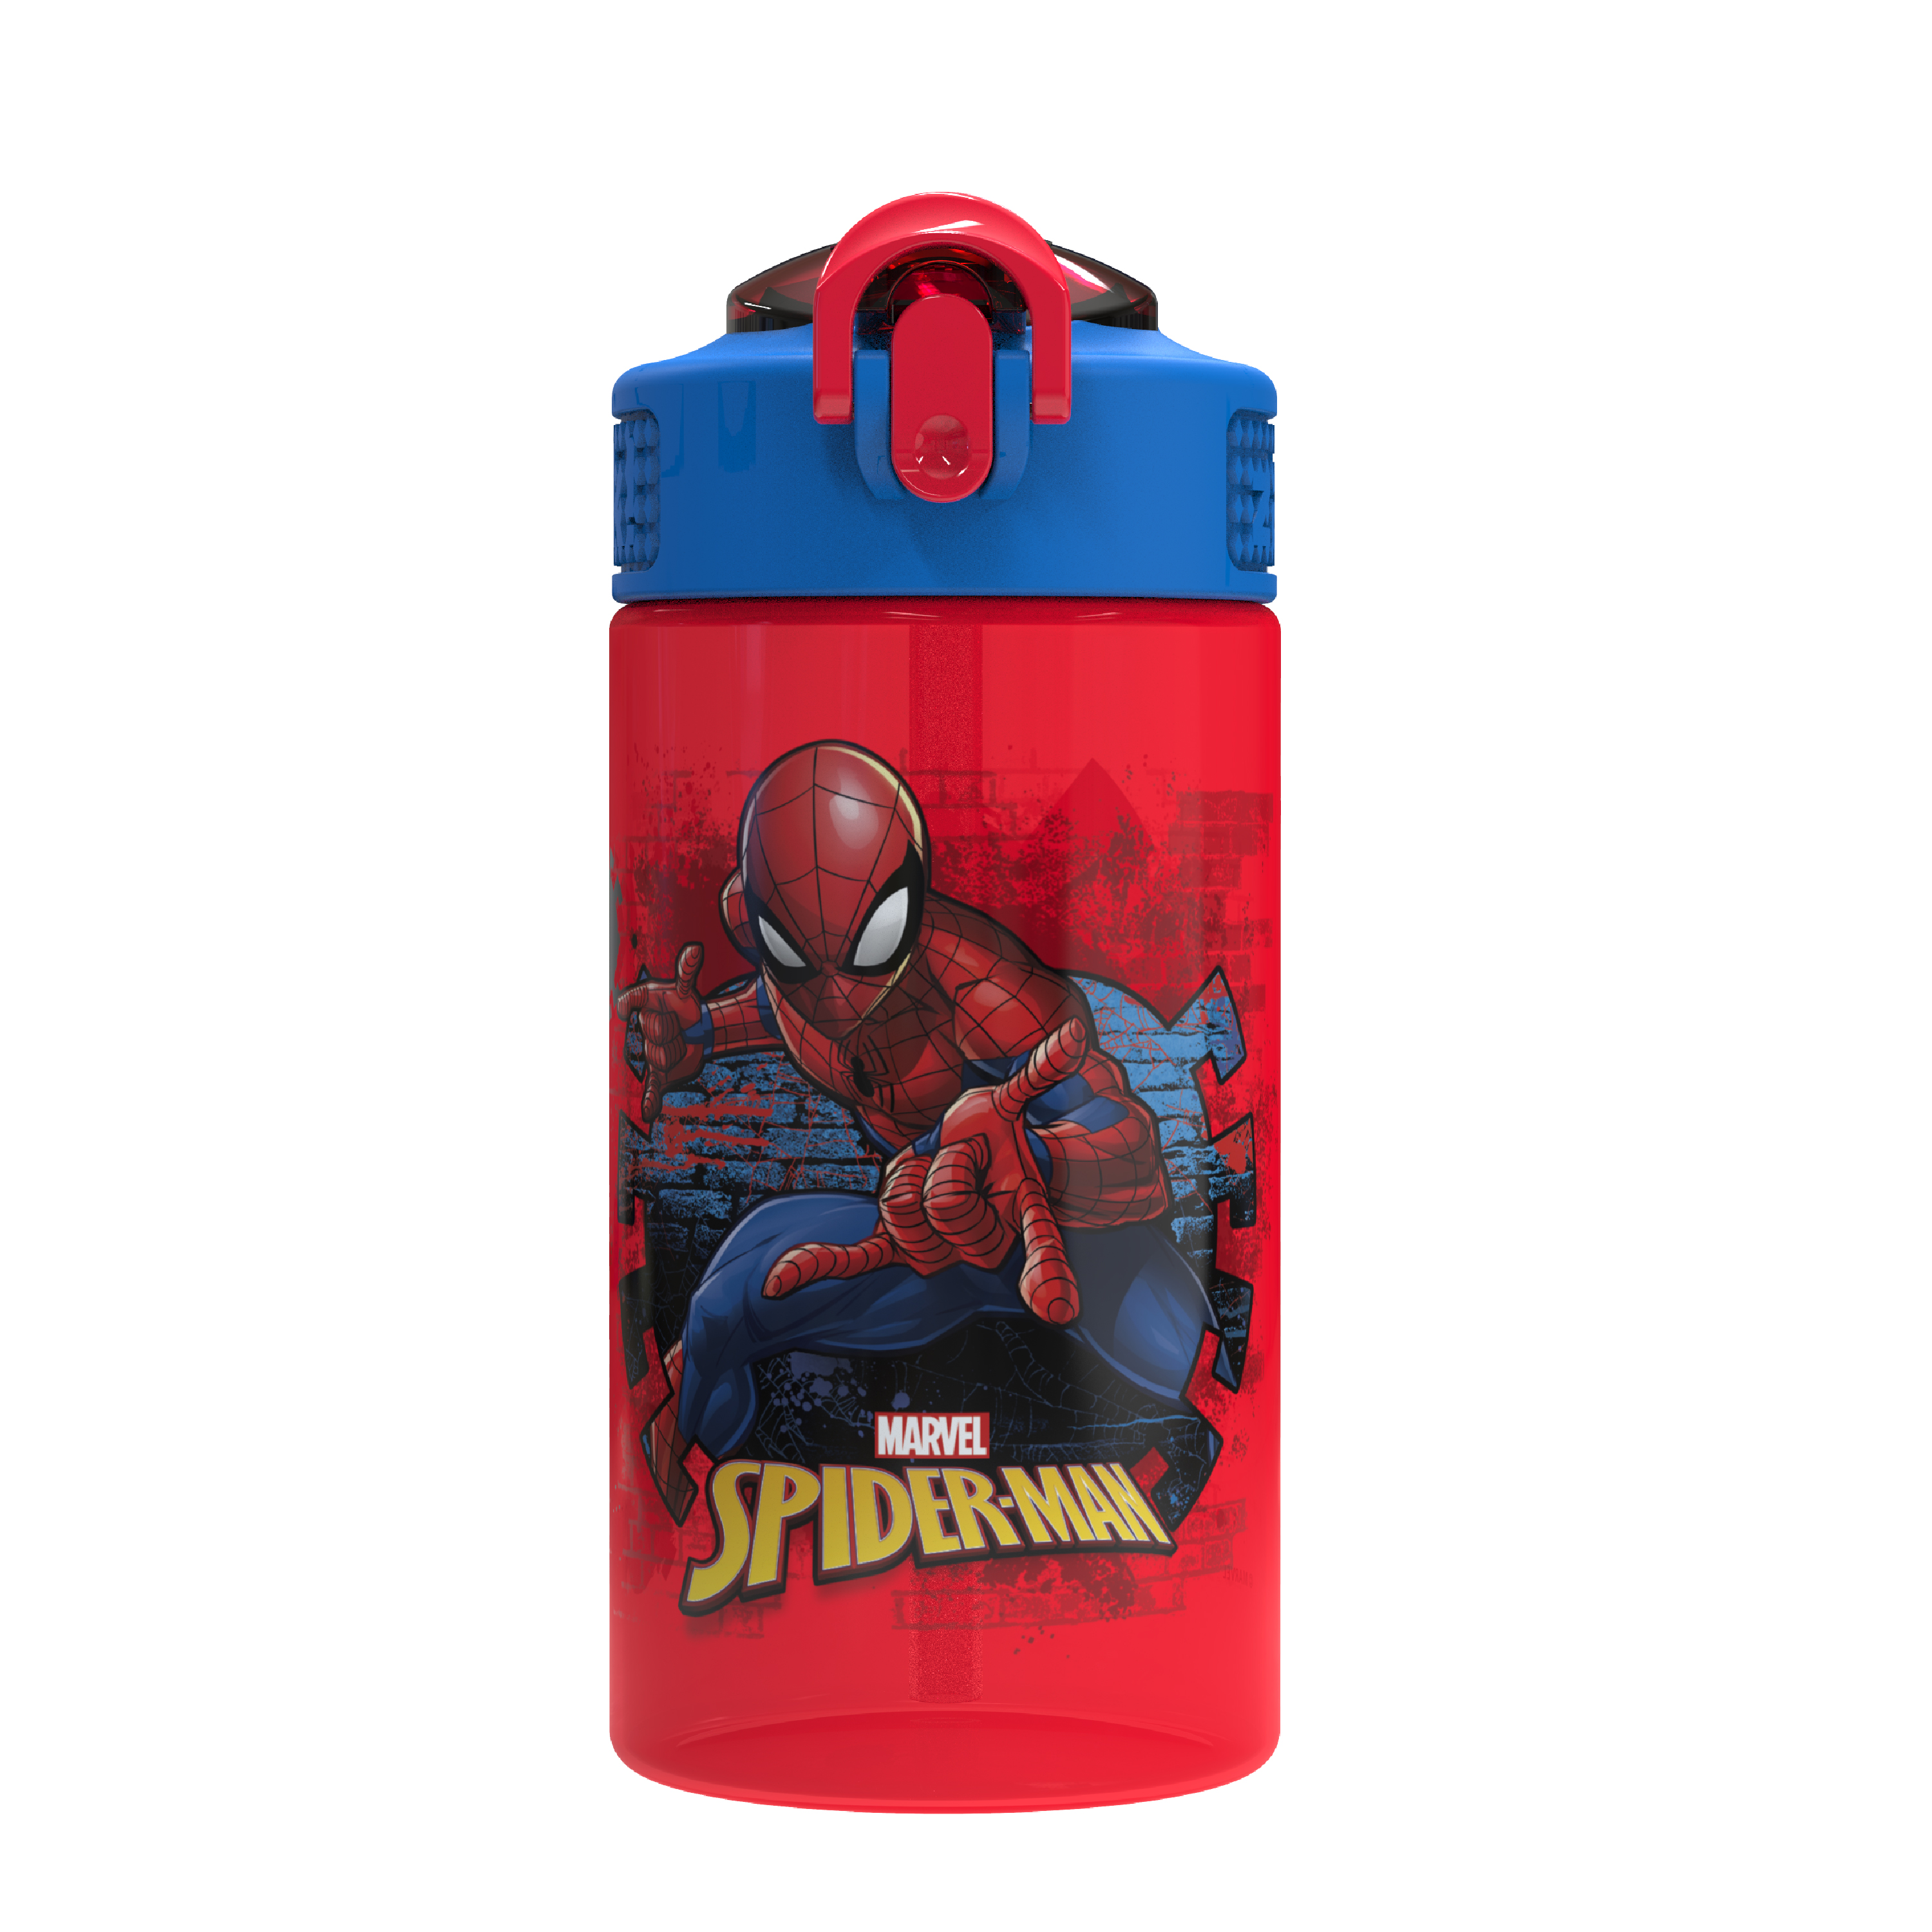 Marvel Comics 16 ounce Reusable Plastic Water Bottle with Straw, Spider-Man slideshow image 1